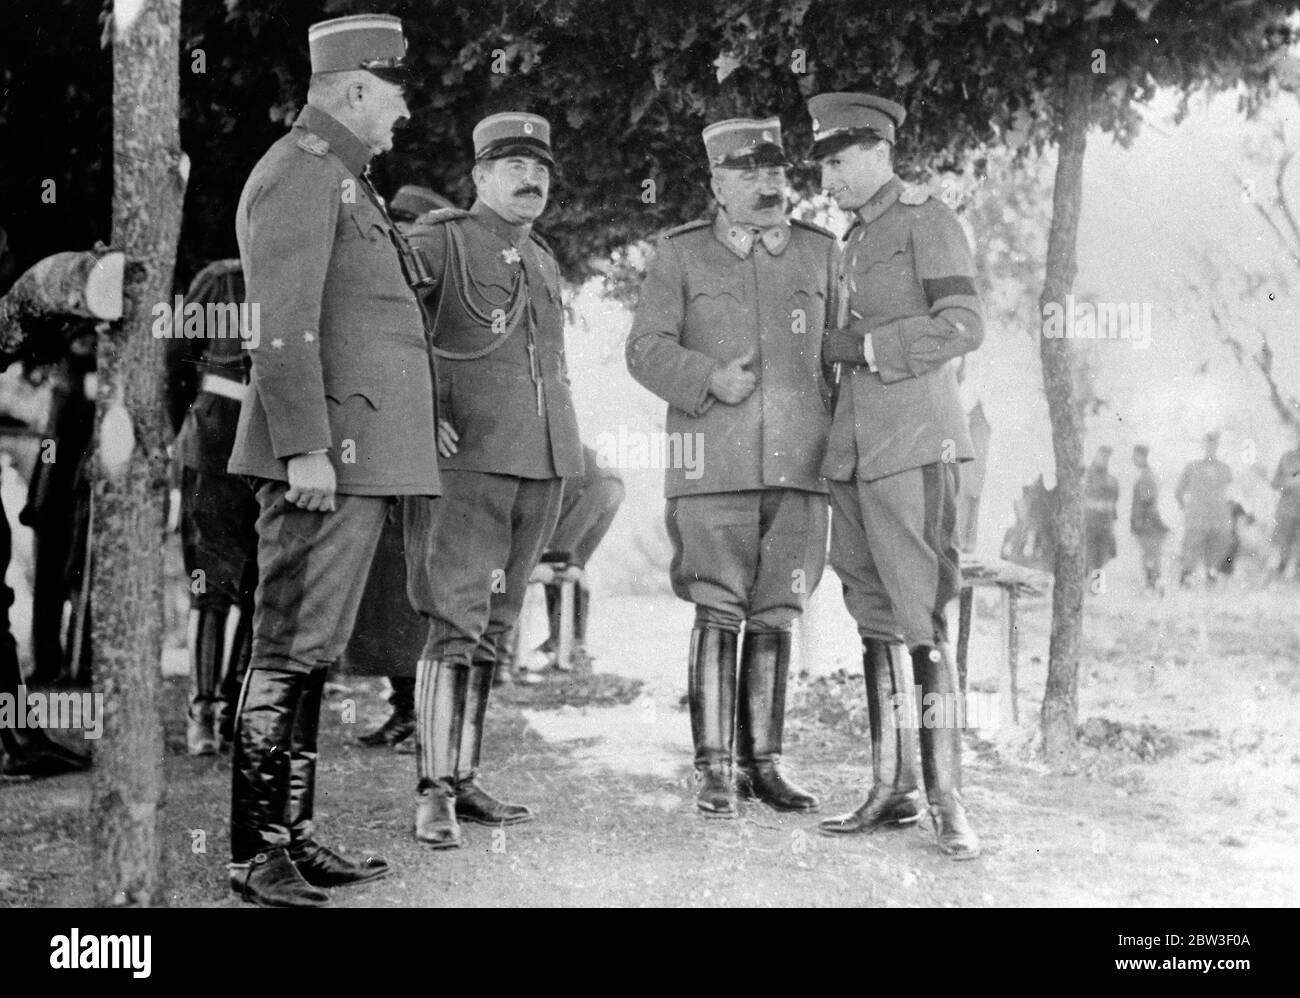 Prince Paul at review of troops in Belgrade . Prince Paul of Jugoslavia was present at a review of troops in Belgrade with M Stoyadinovitch , Jugoslav Premier , on whose life an attempt was recently made by an oppostion deputy in Parliament , and members of M Stoyadinovitch ' s reconstructed Cabinet . Photo shows , Prince Paul ( right ) talking with General Lubomir Meritel , new War Minister, at the review . Second from left is General Petar Tivkovitch . 11 March 1936 Stock Photo